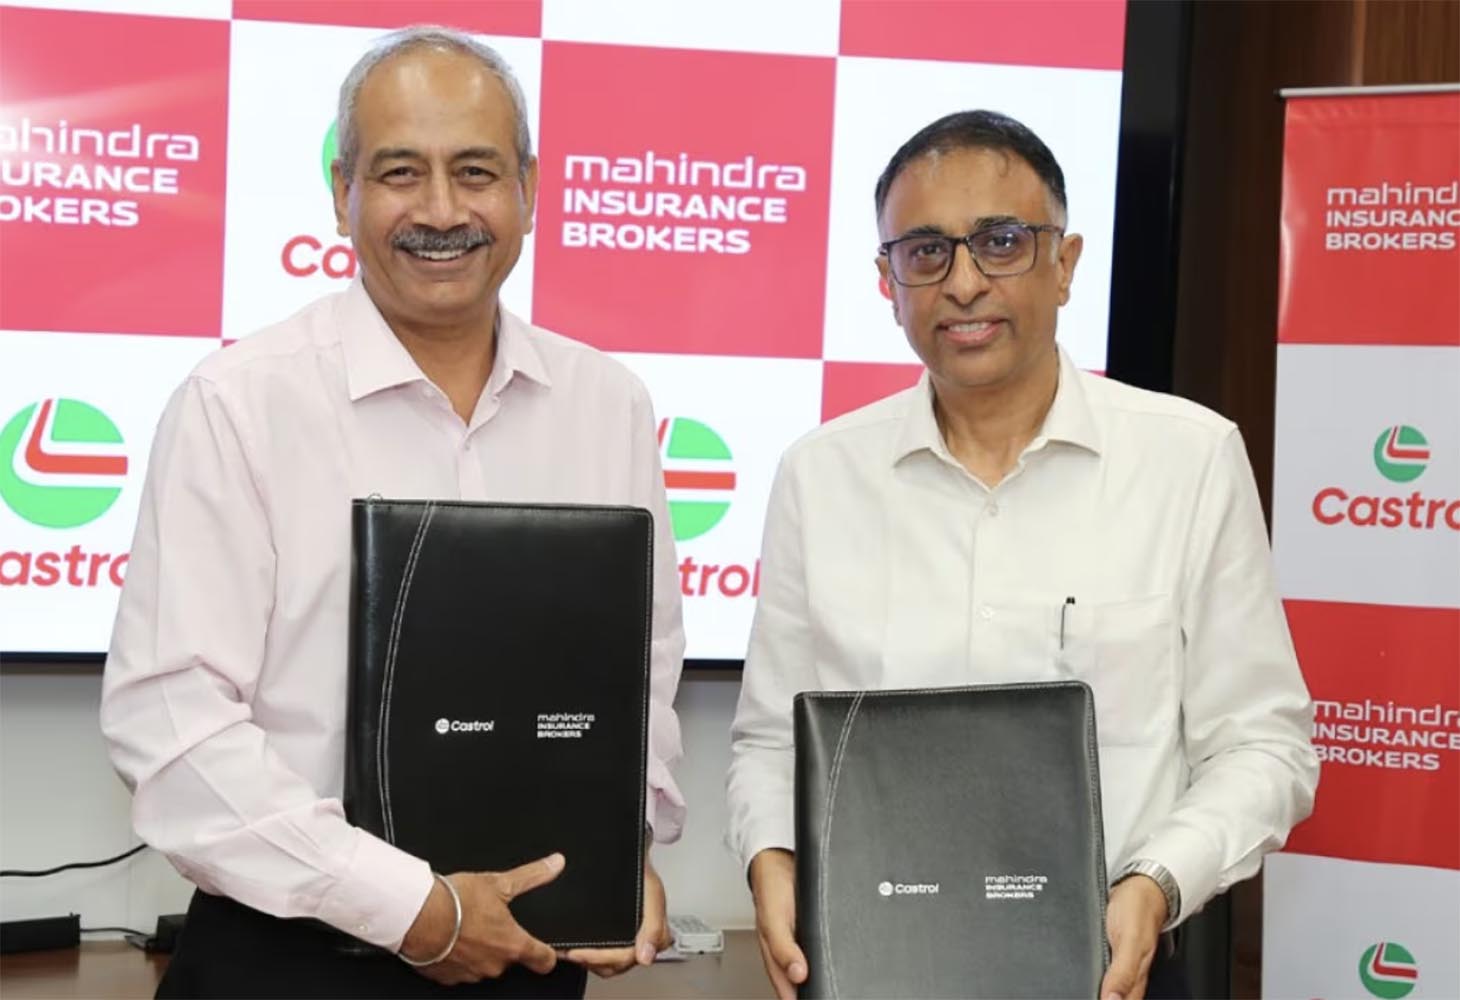 Castrol announces alliance with Mahindra Insurance in India